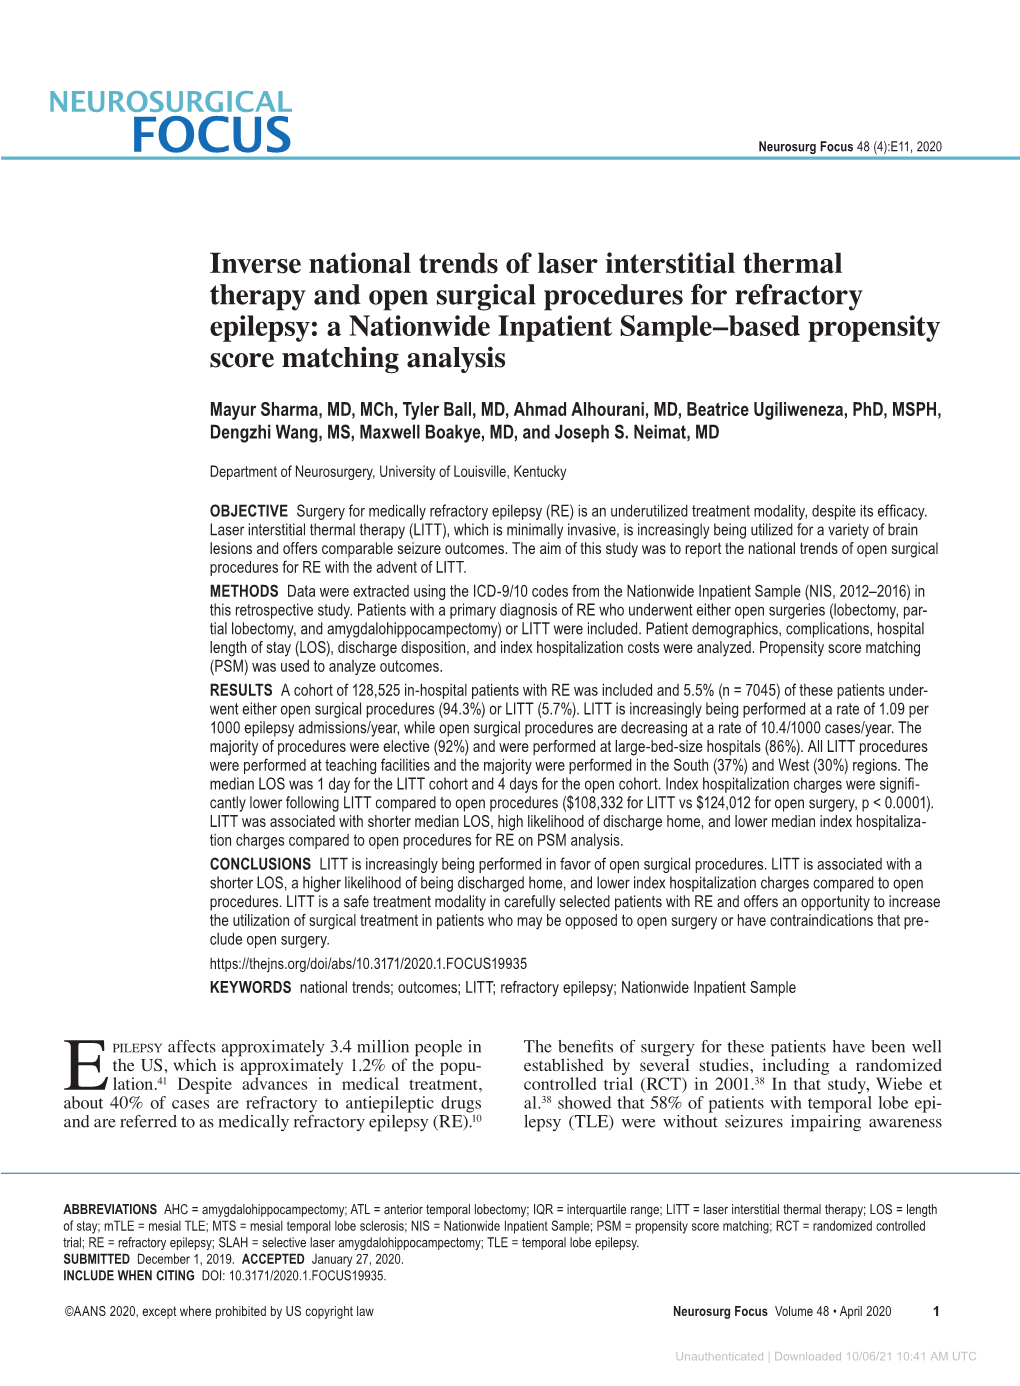 Inverse National Trends of Laser Interstitial Thermal Therapy and Open